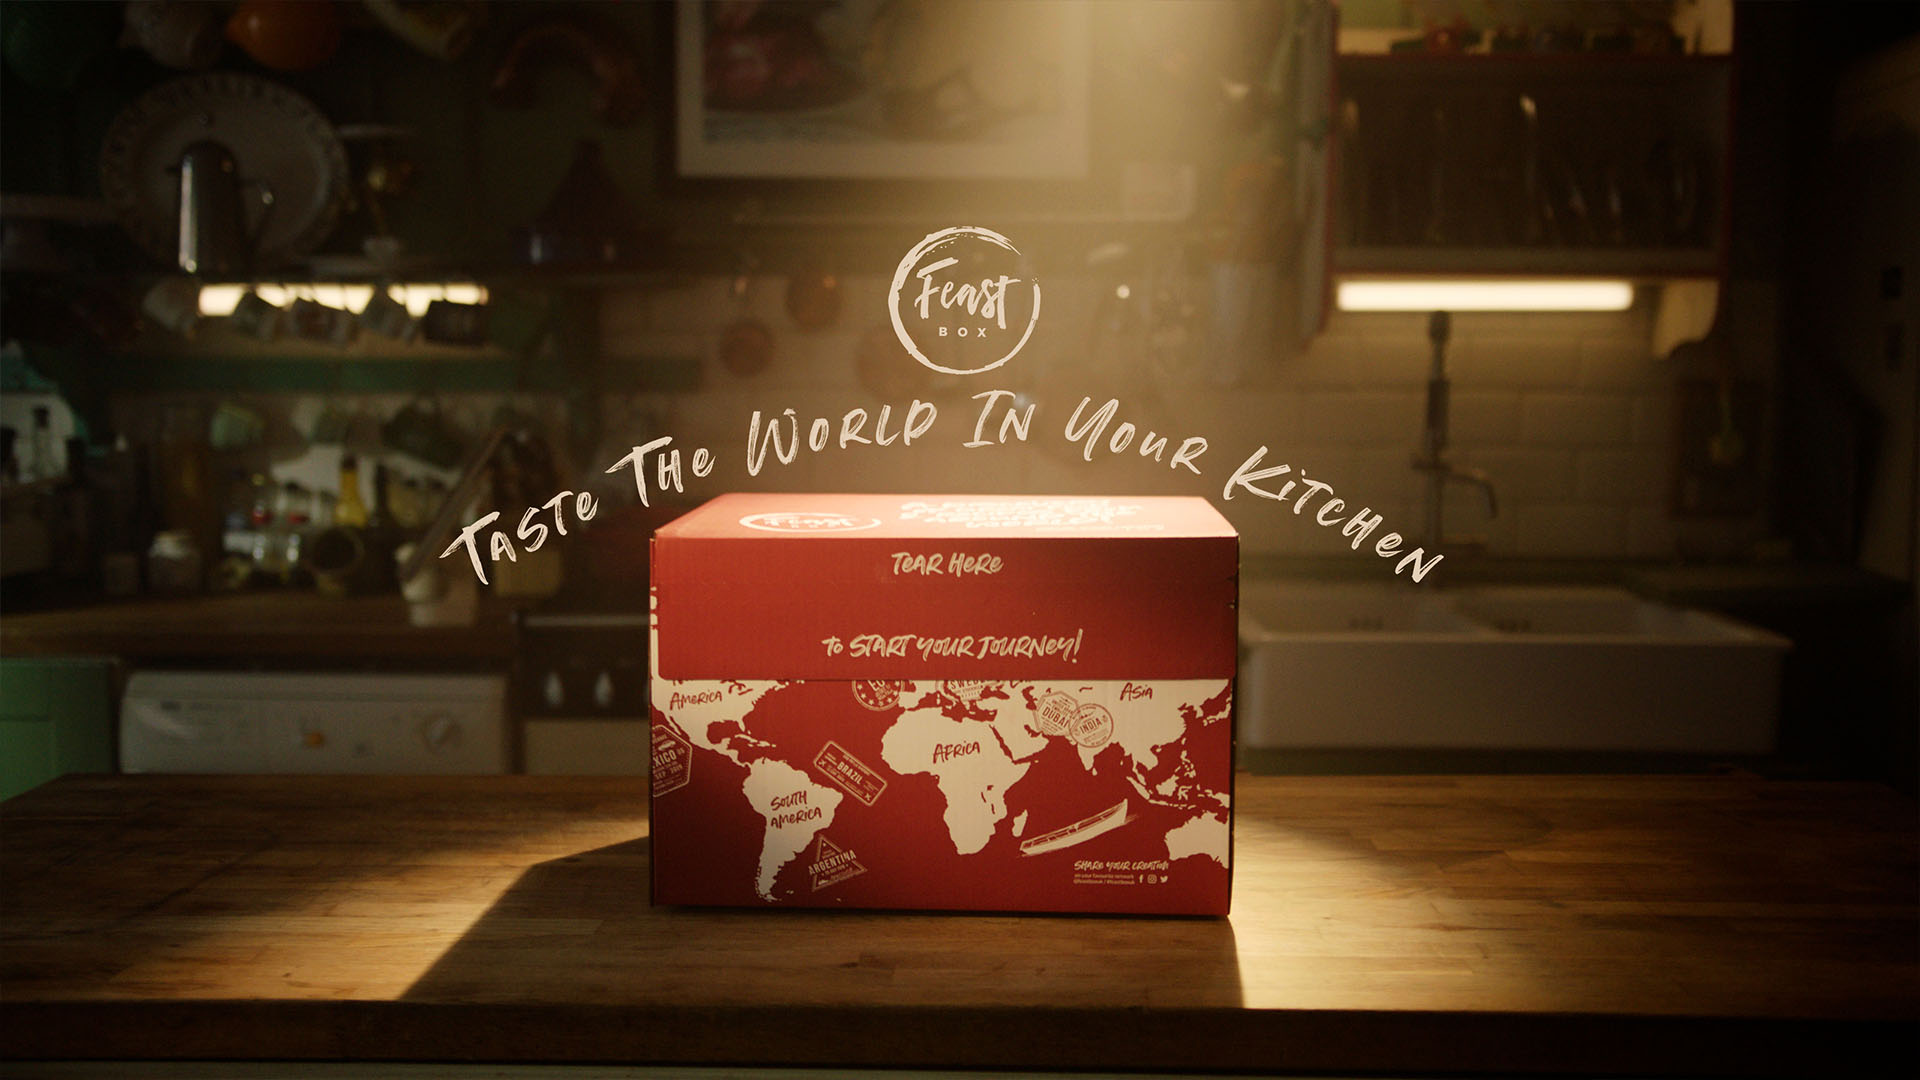 Feast Box: TV advertising campaign